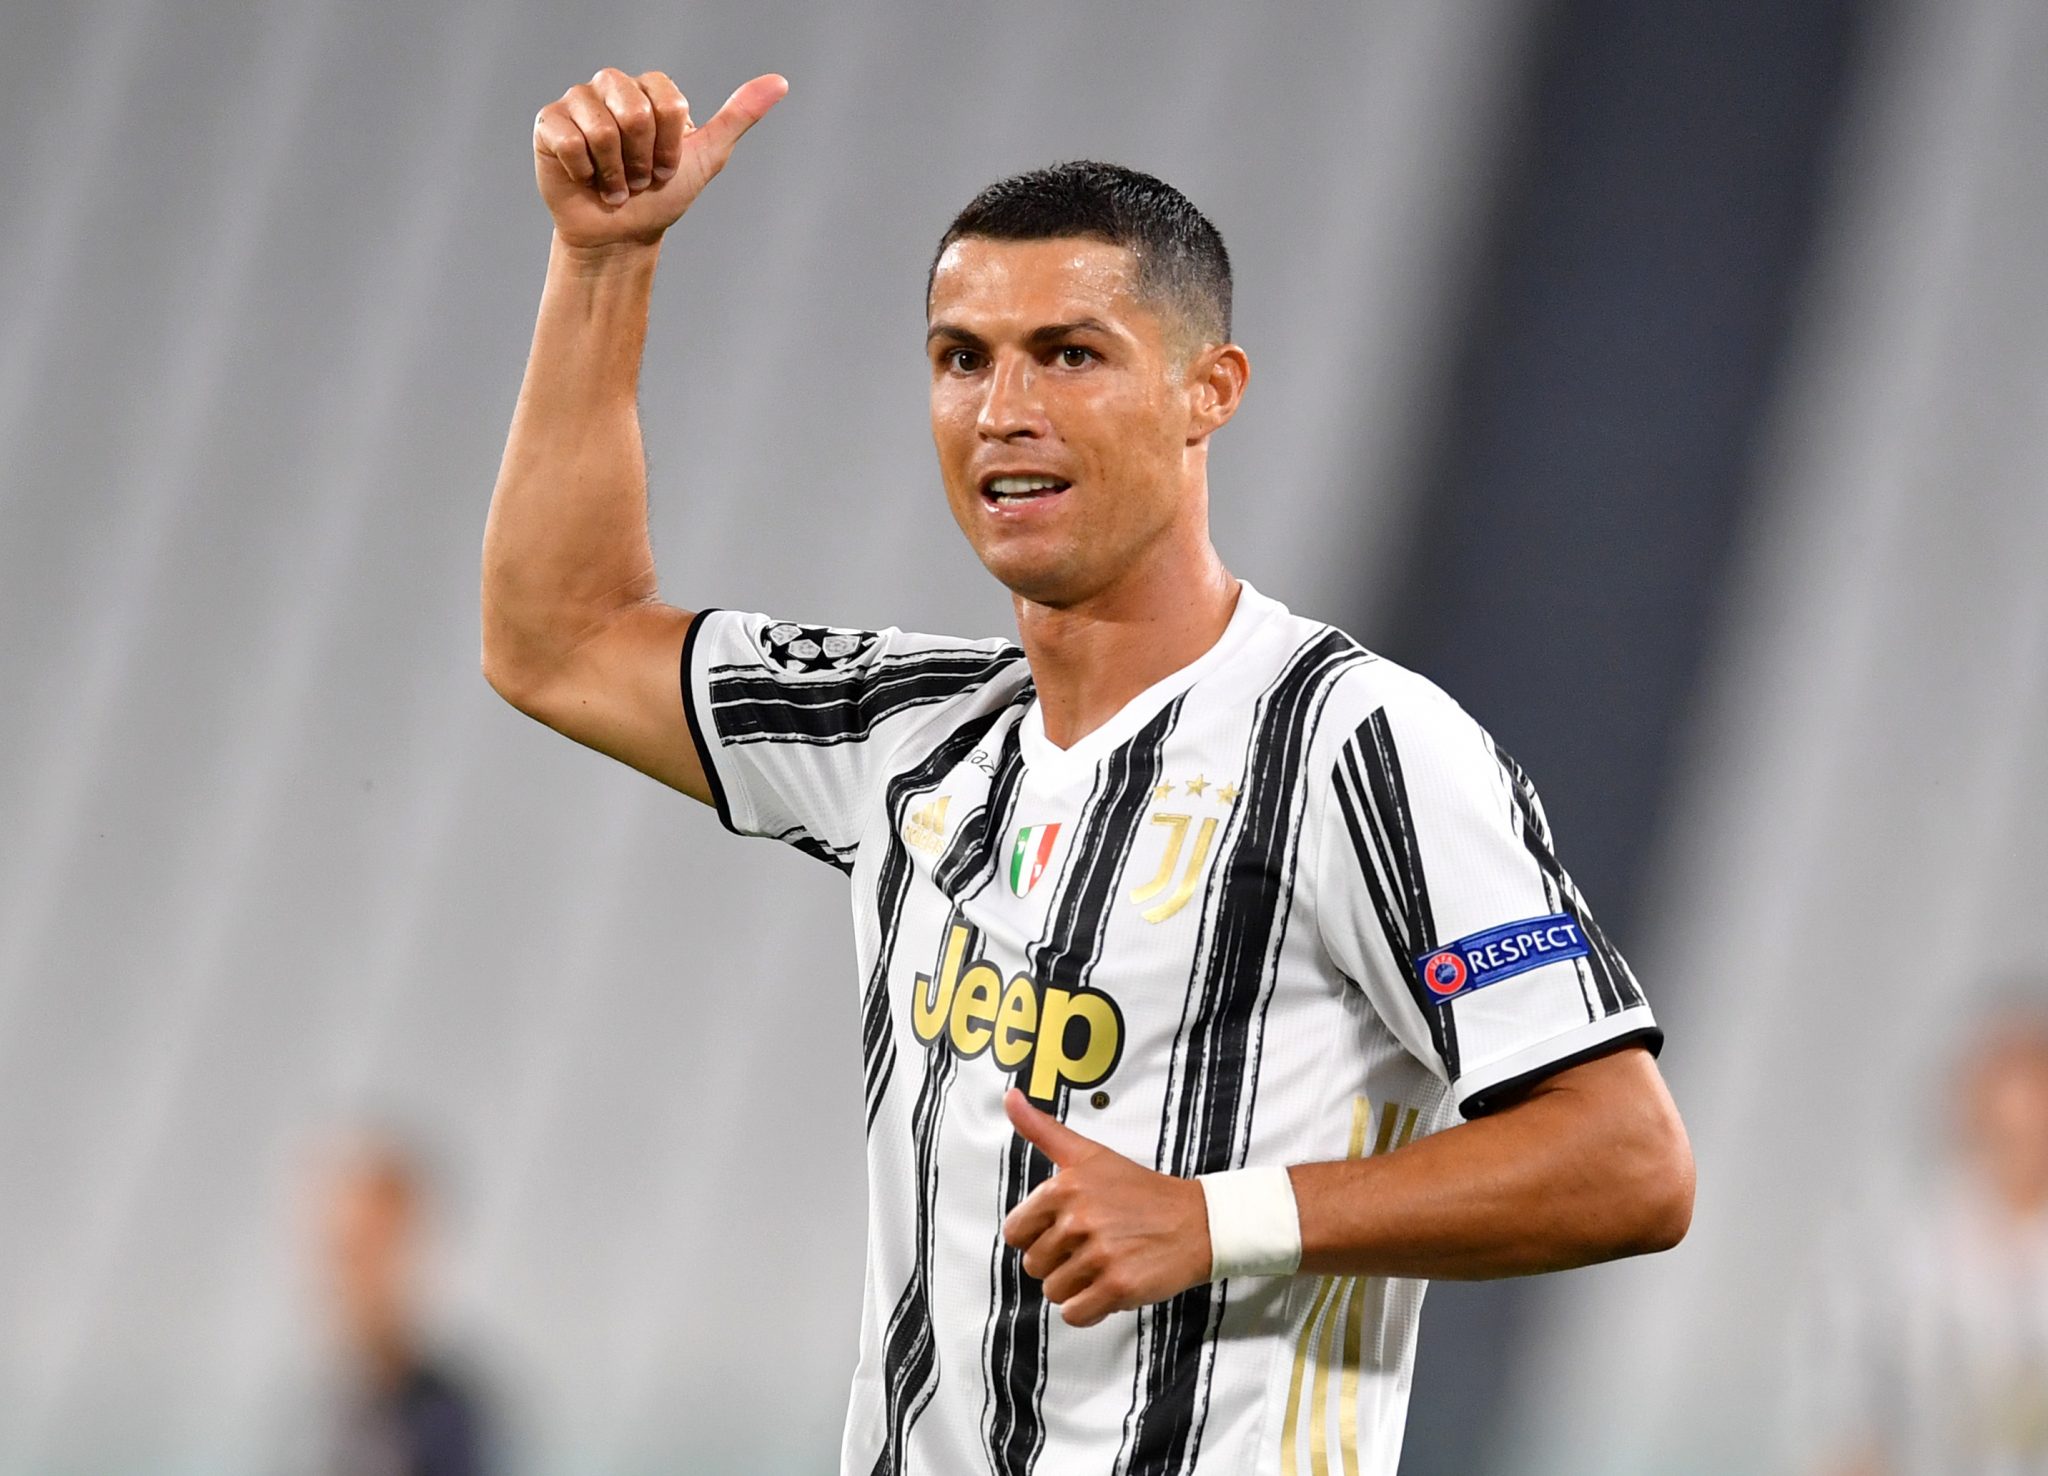 Ronaldo will get another test today to see if he can play against Verona